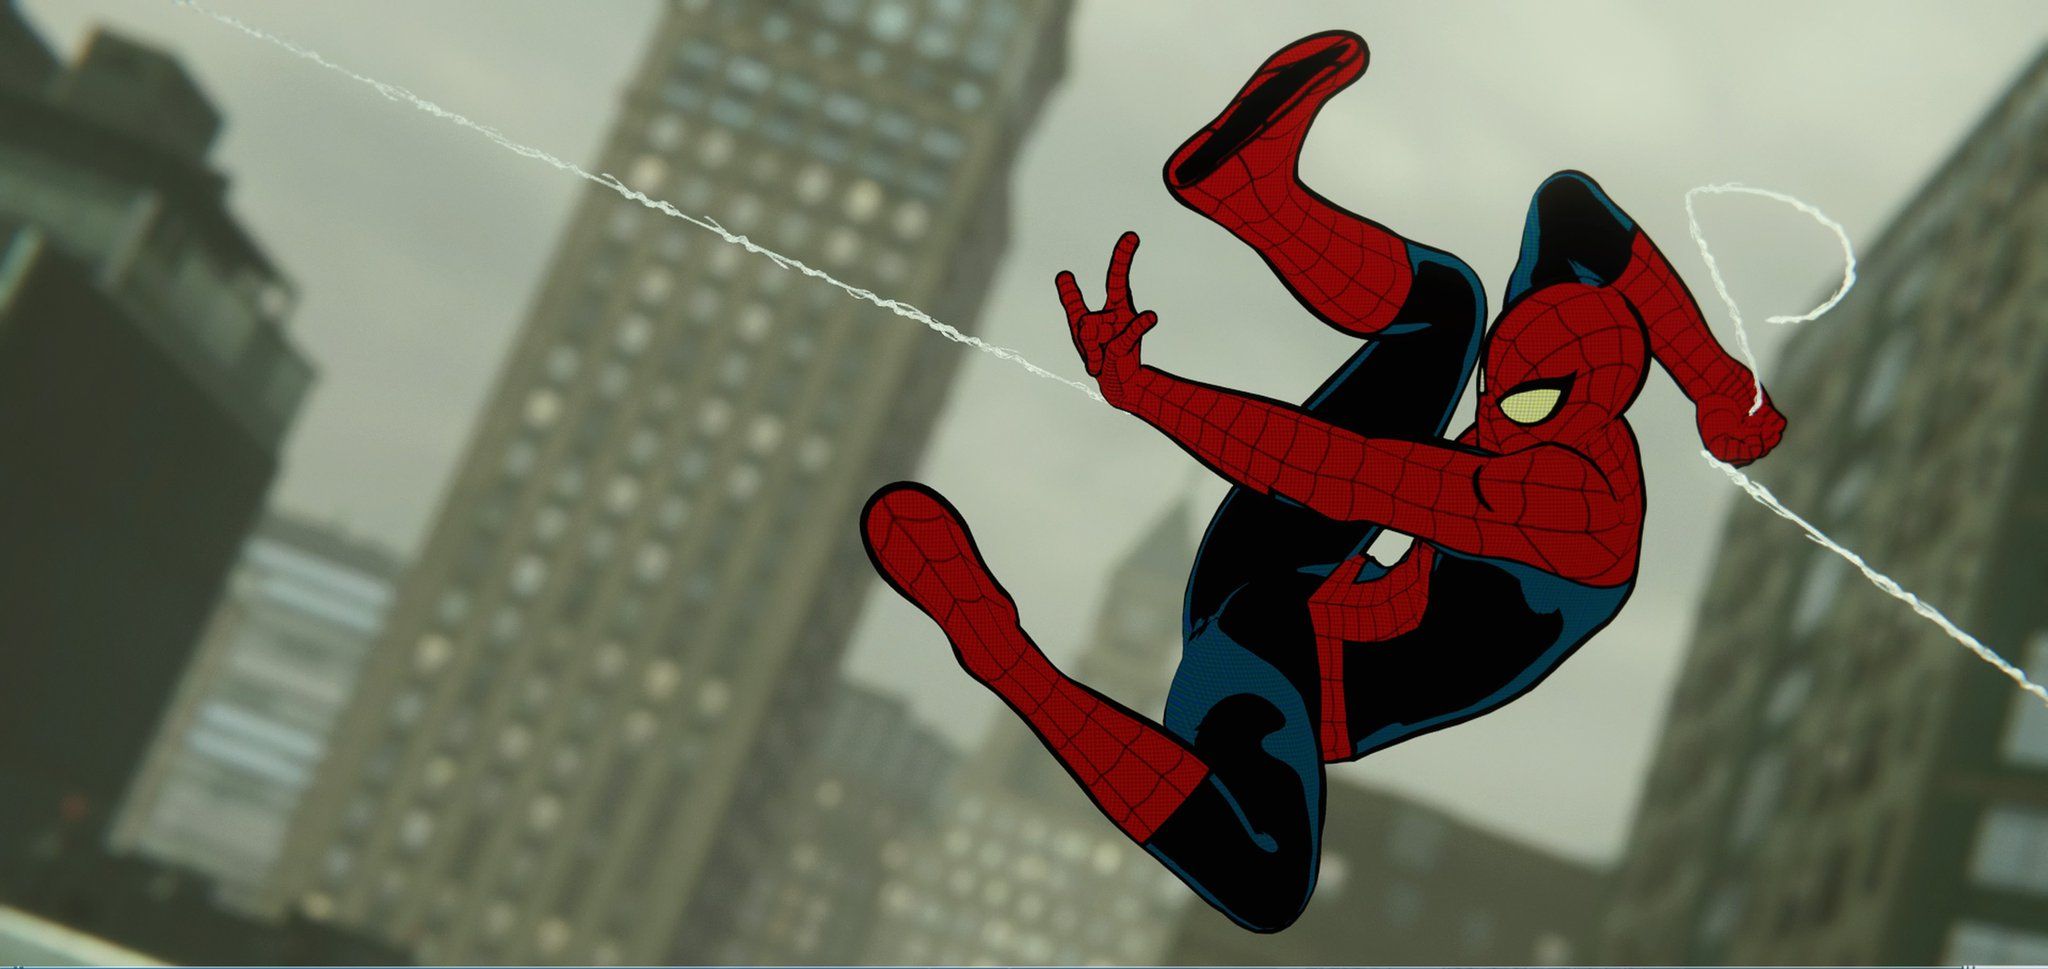 Spider-Man PS4 Retro Suit Loading Screen